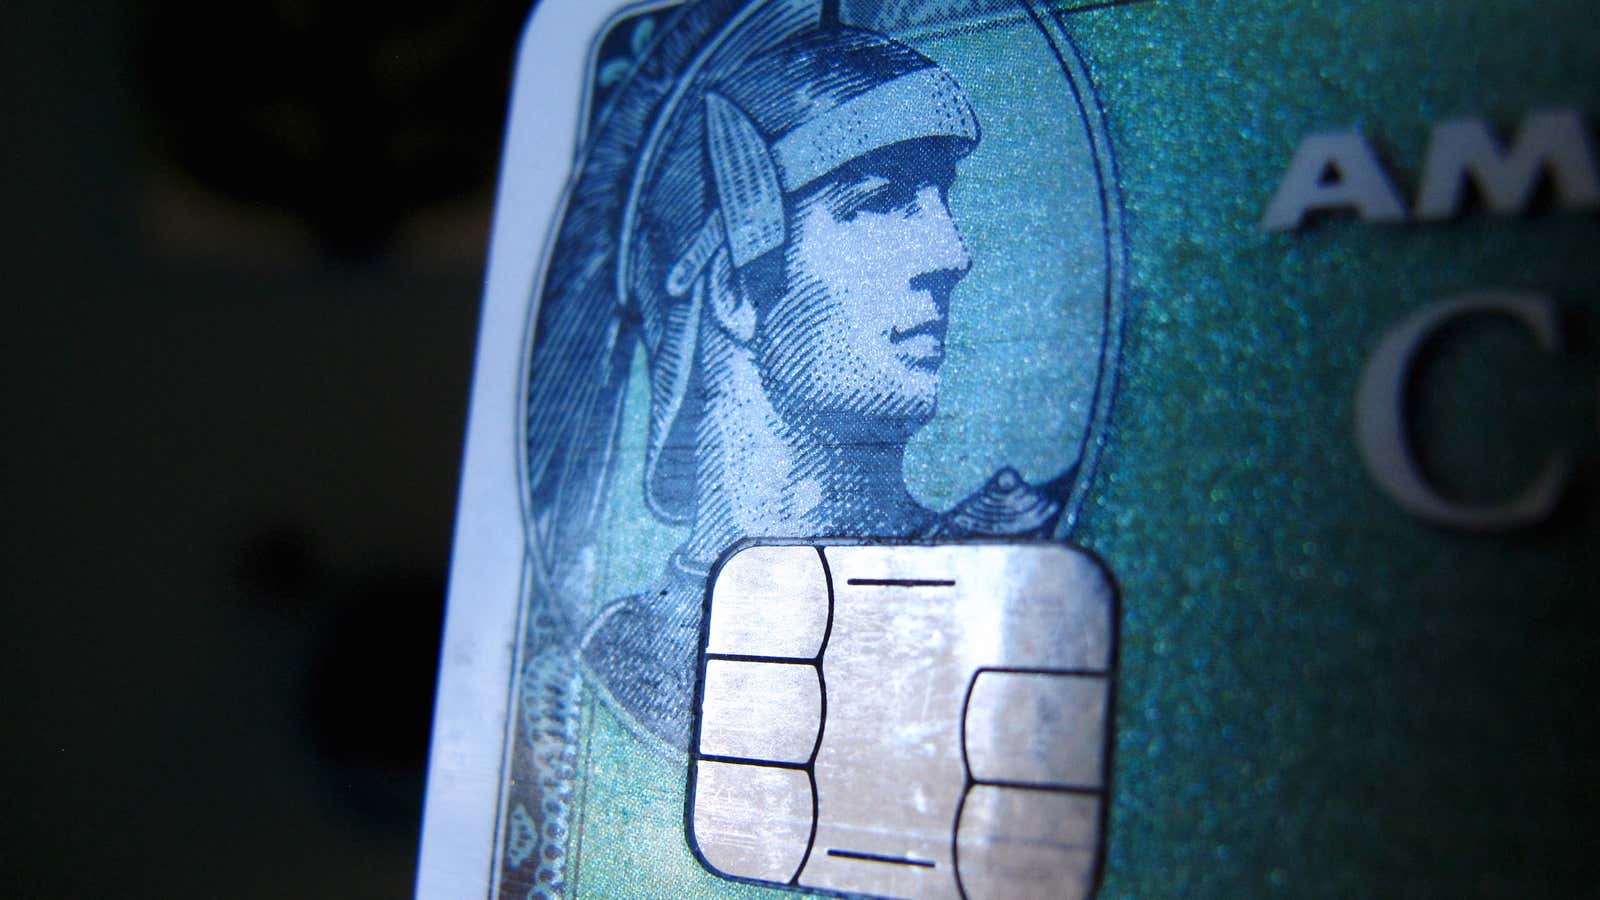 New chips inside credit and debit cards make them more secure, but may also make tipping awkward.